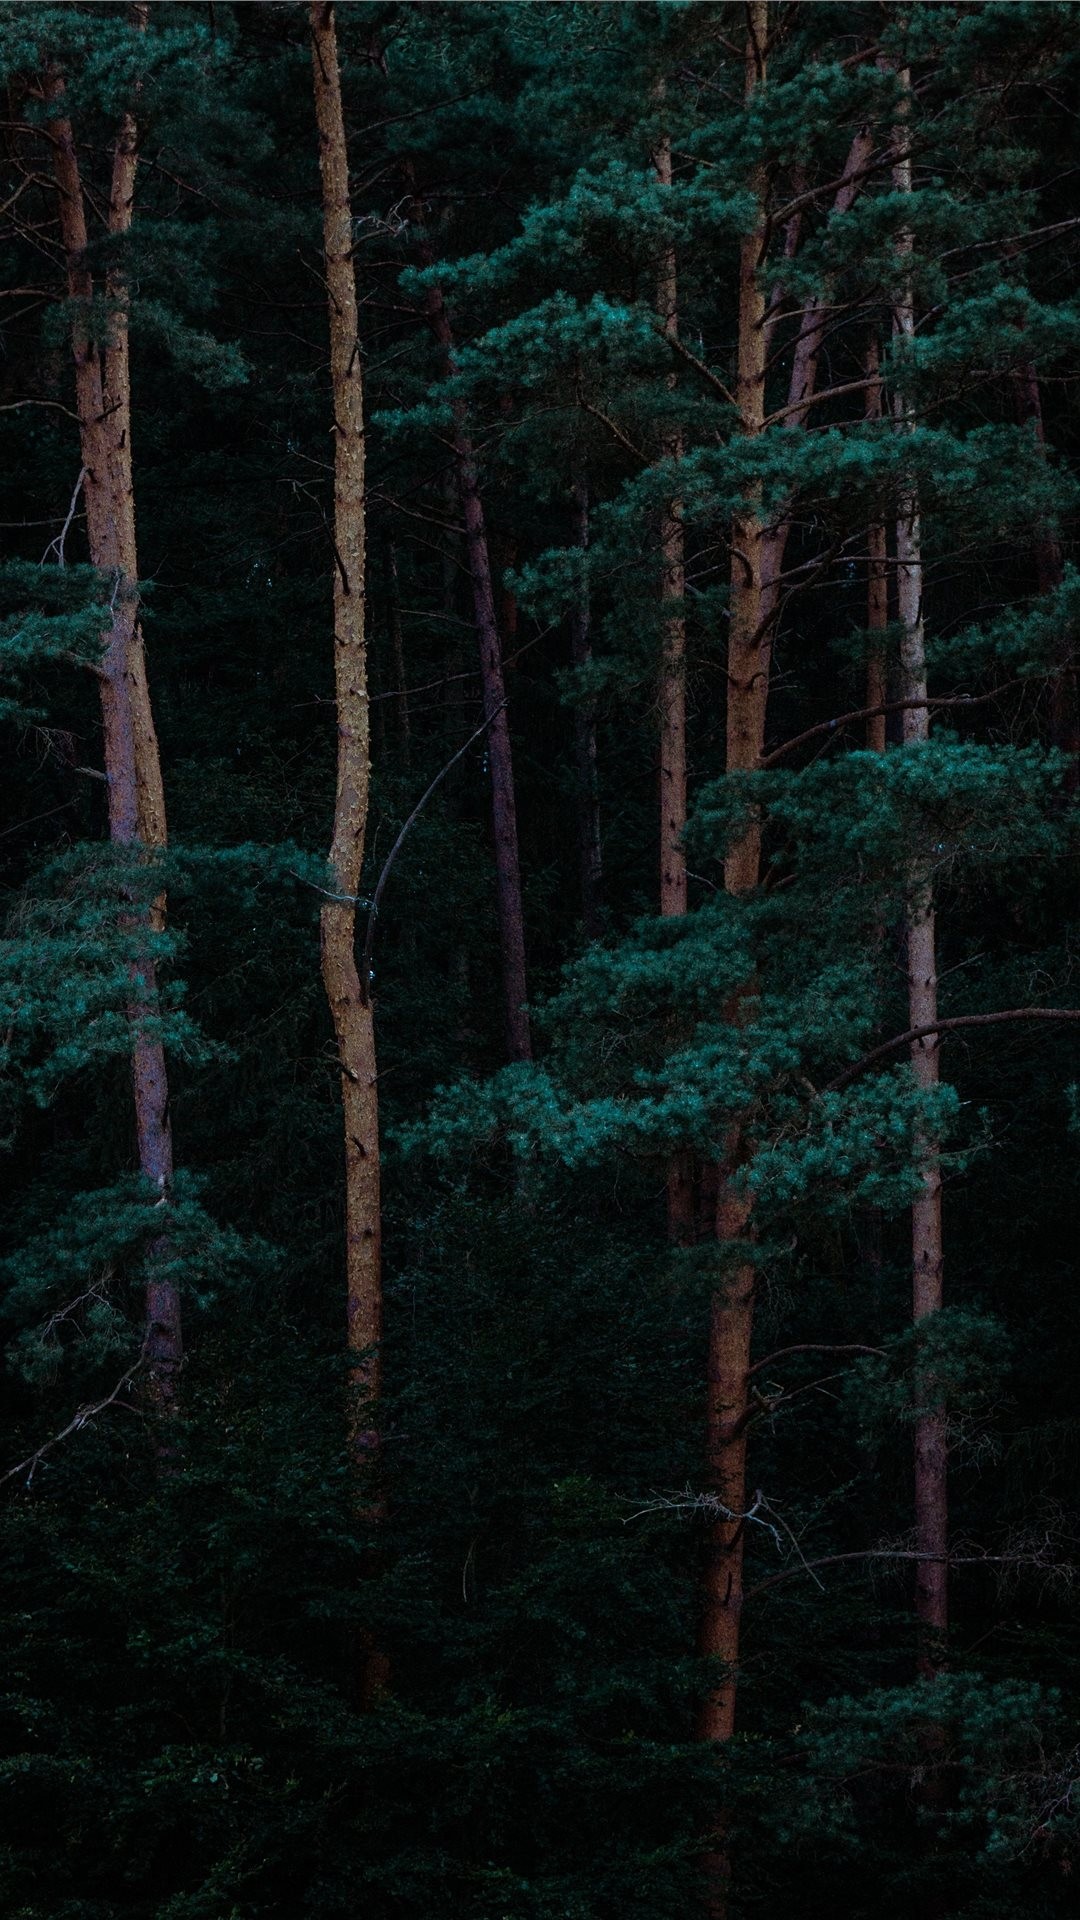 Forest iPhone wallpaper